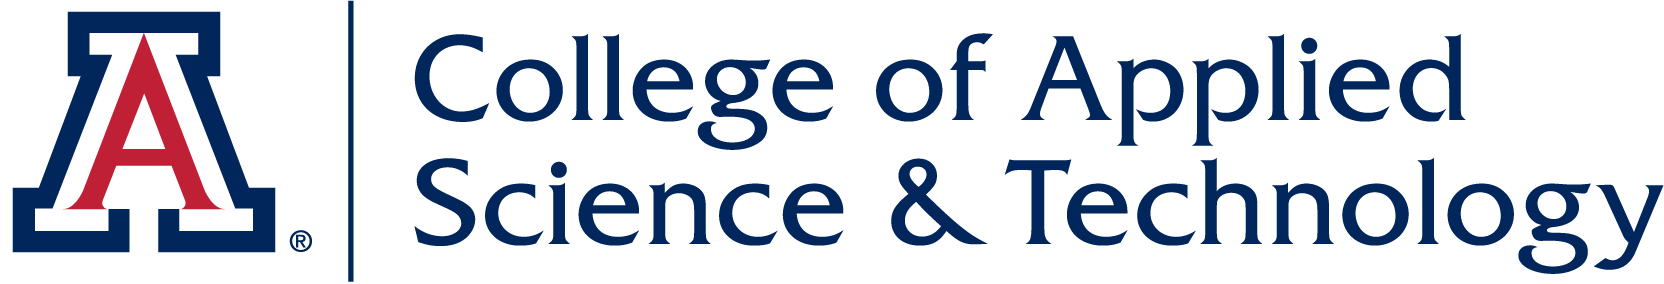 College of Applied Science & Technology Title Sponsor